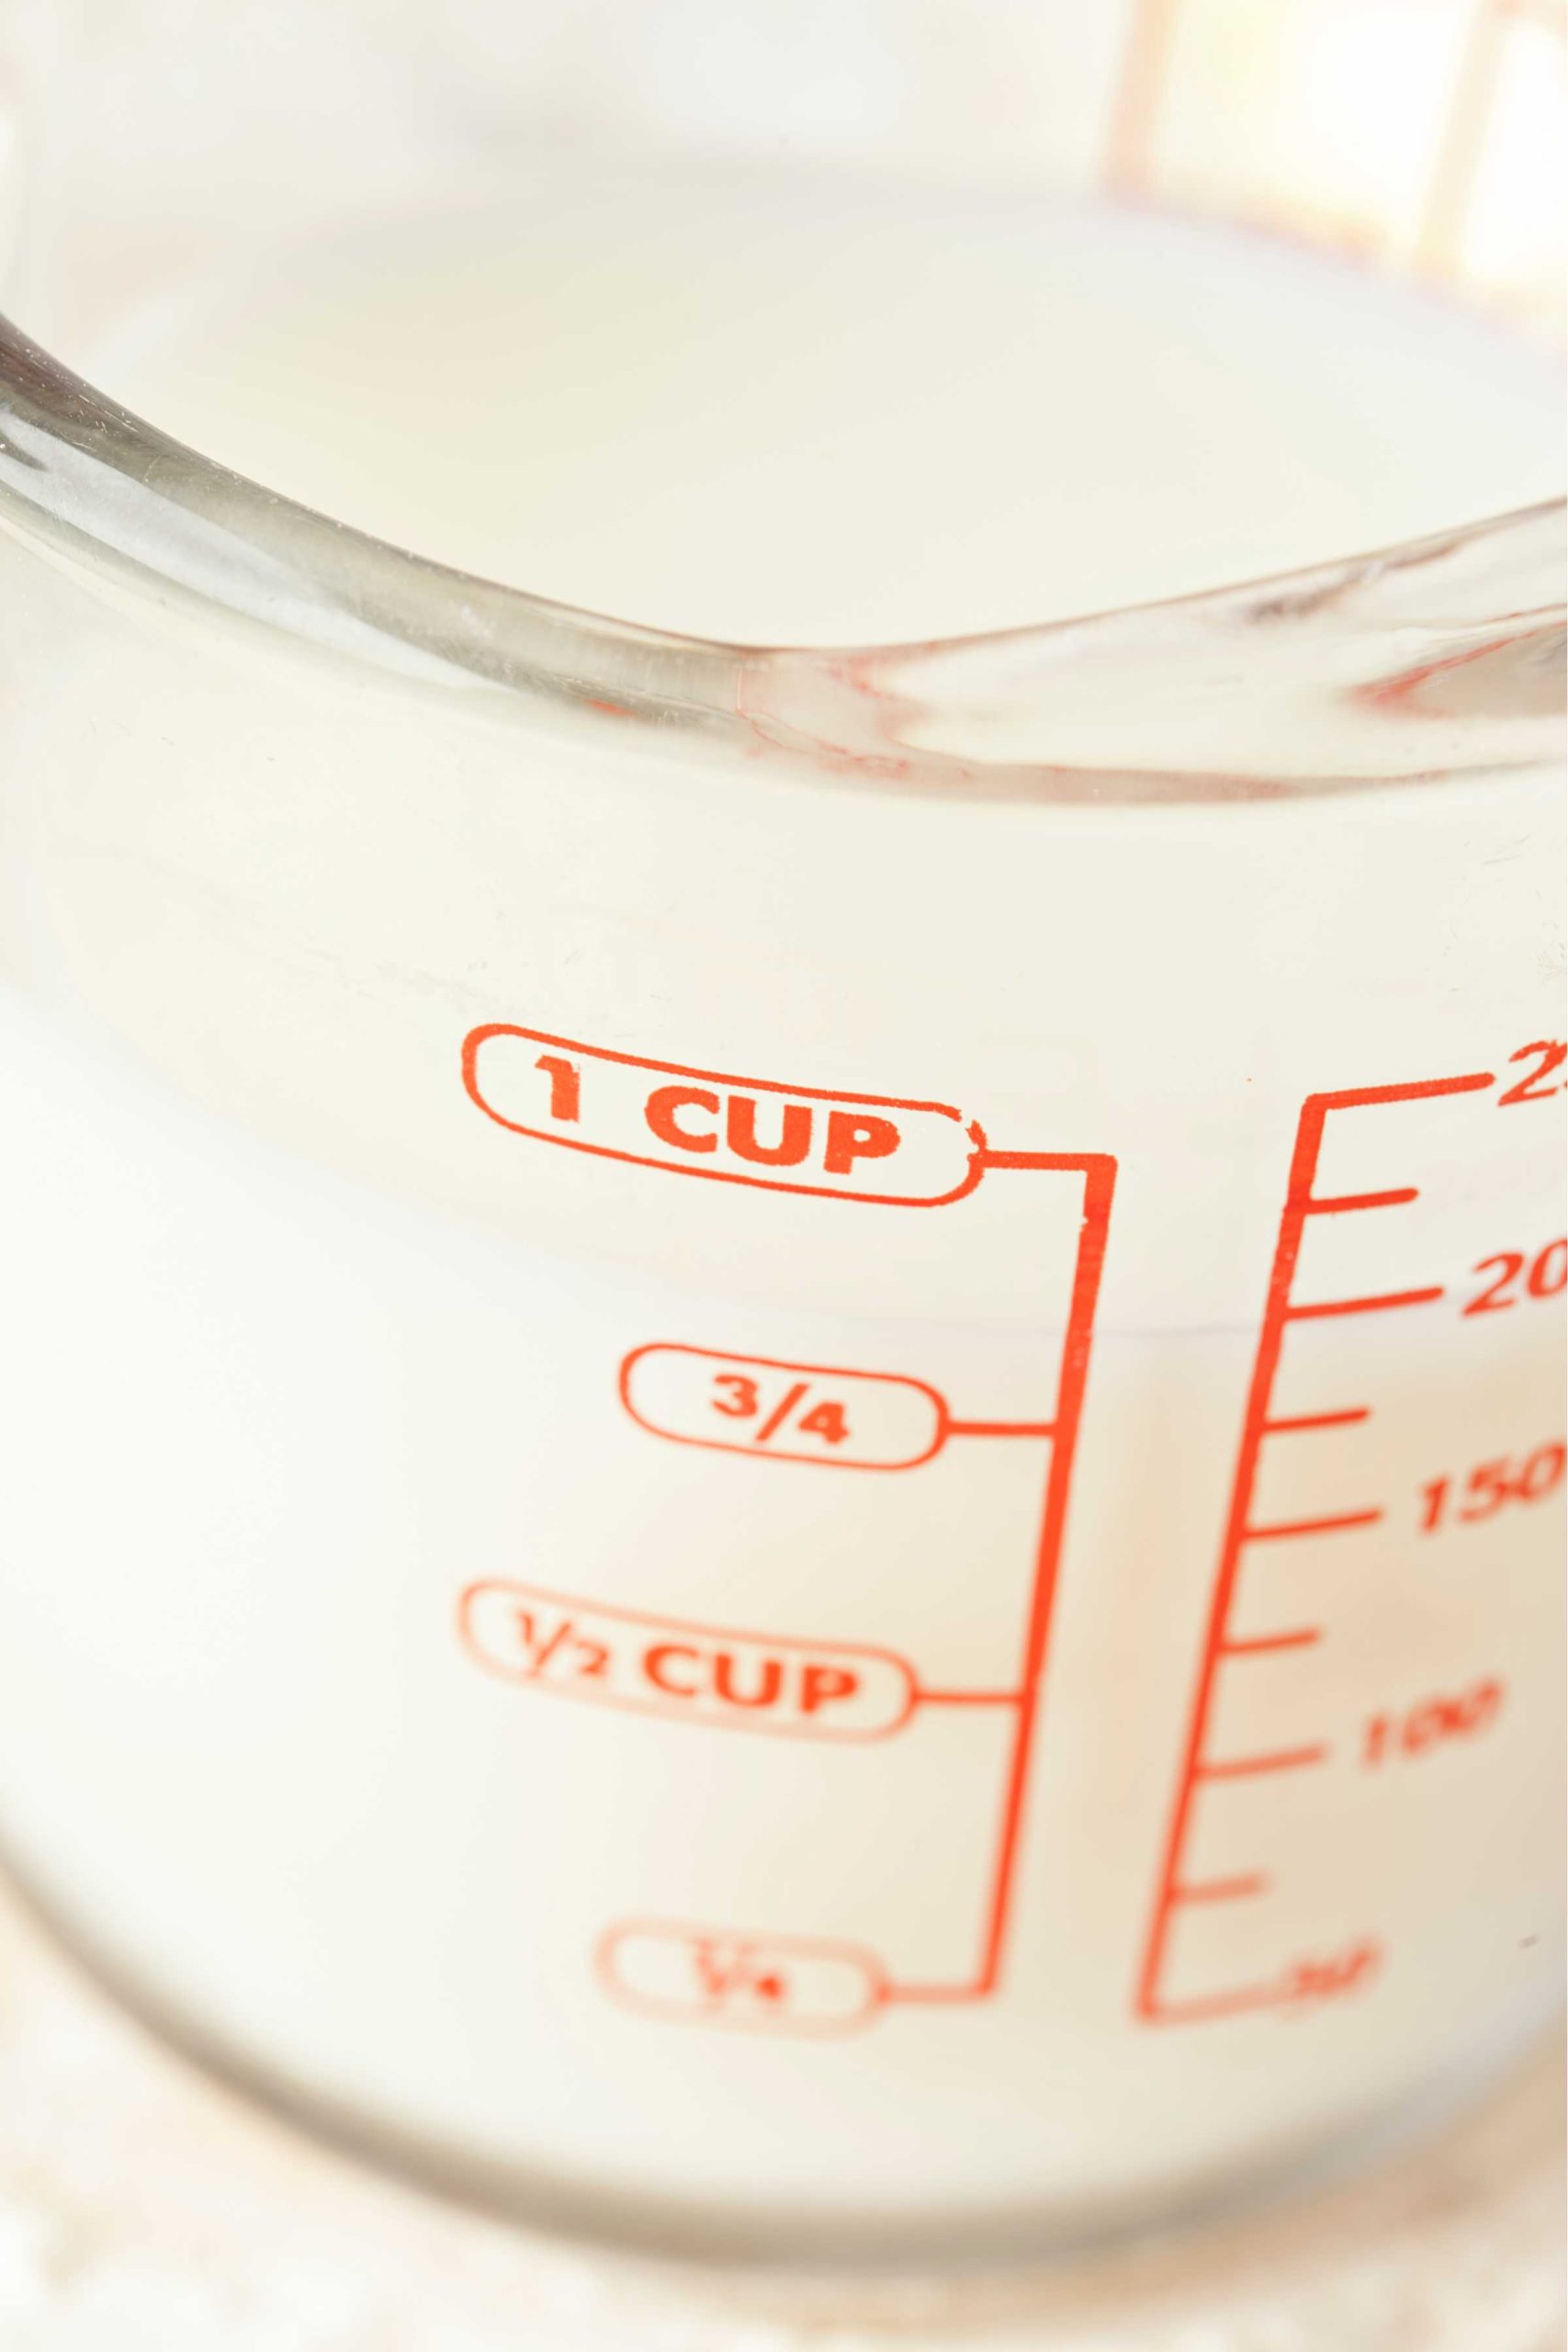 How to Measure 3/4 cup, How many tablespoons in 3/4 cup